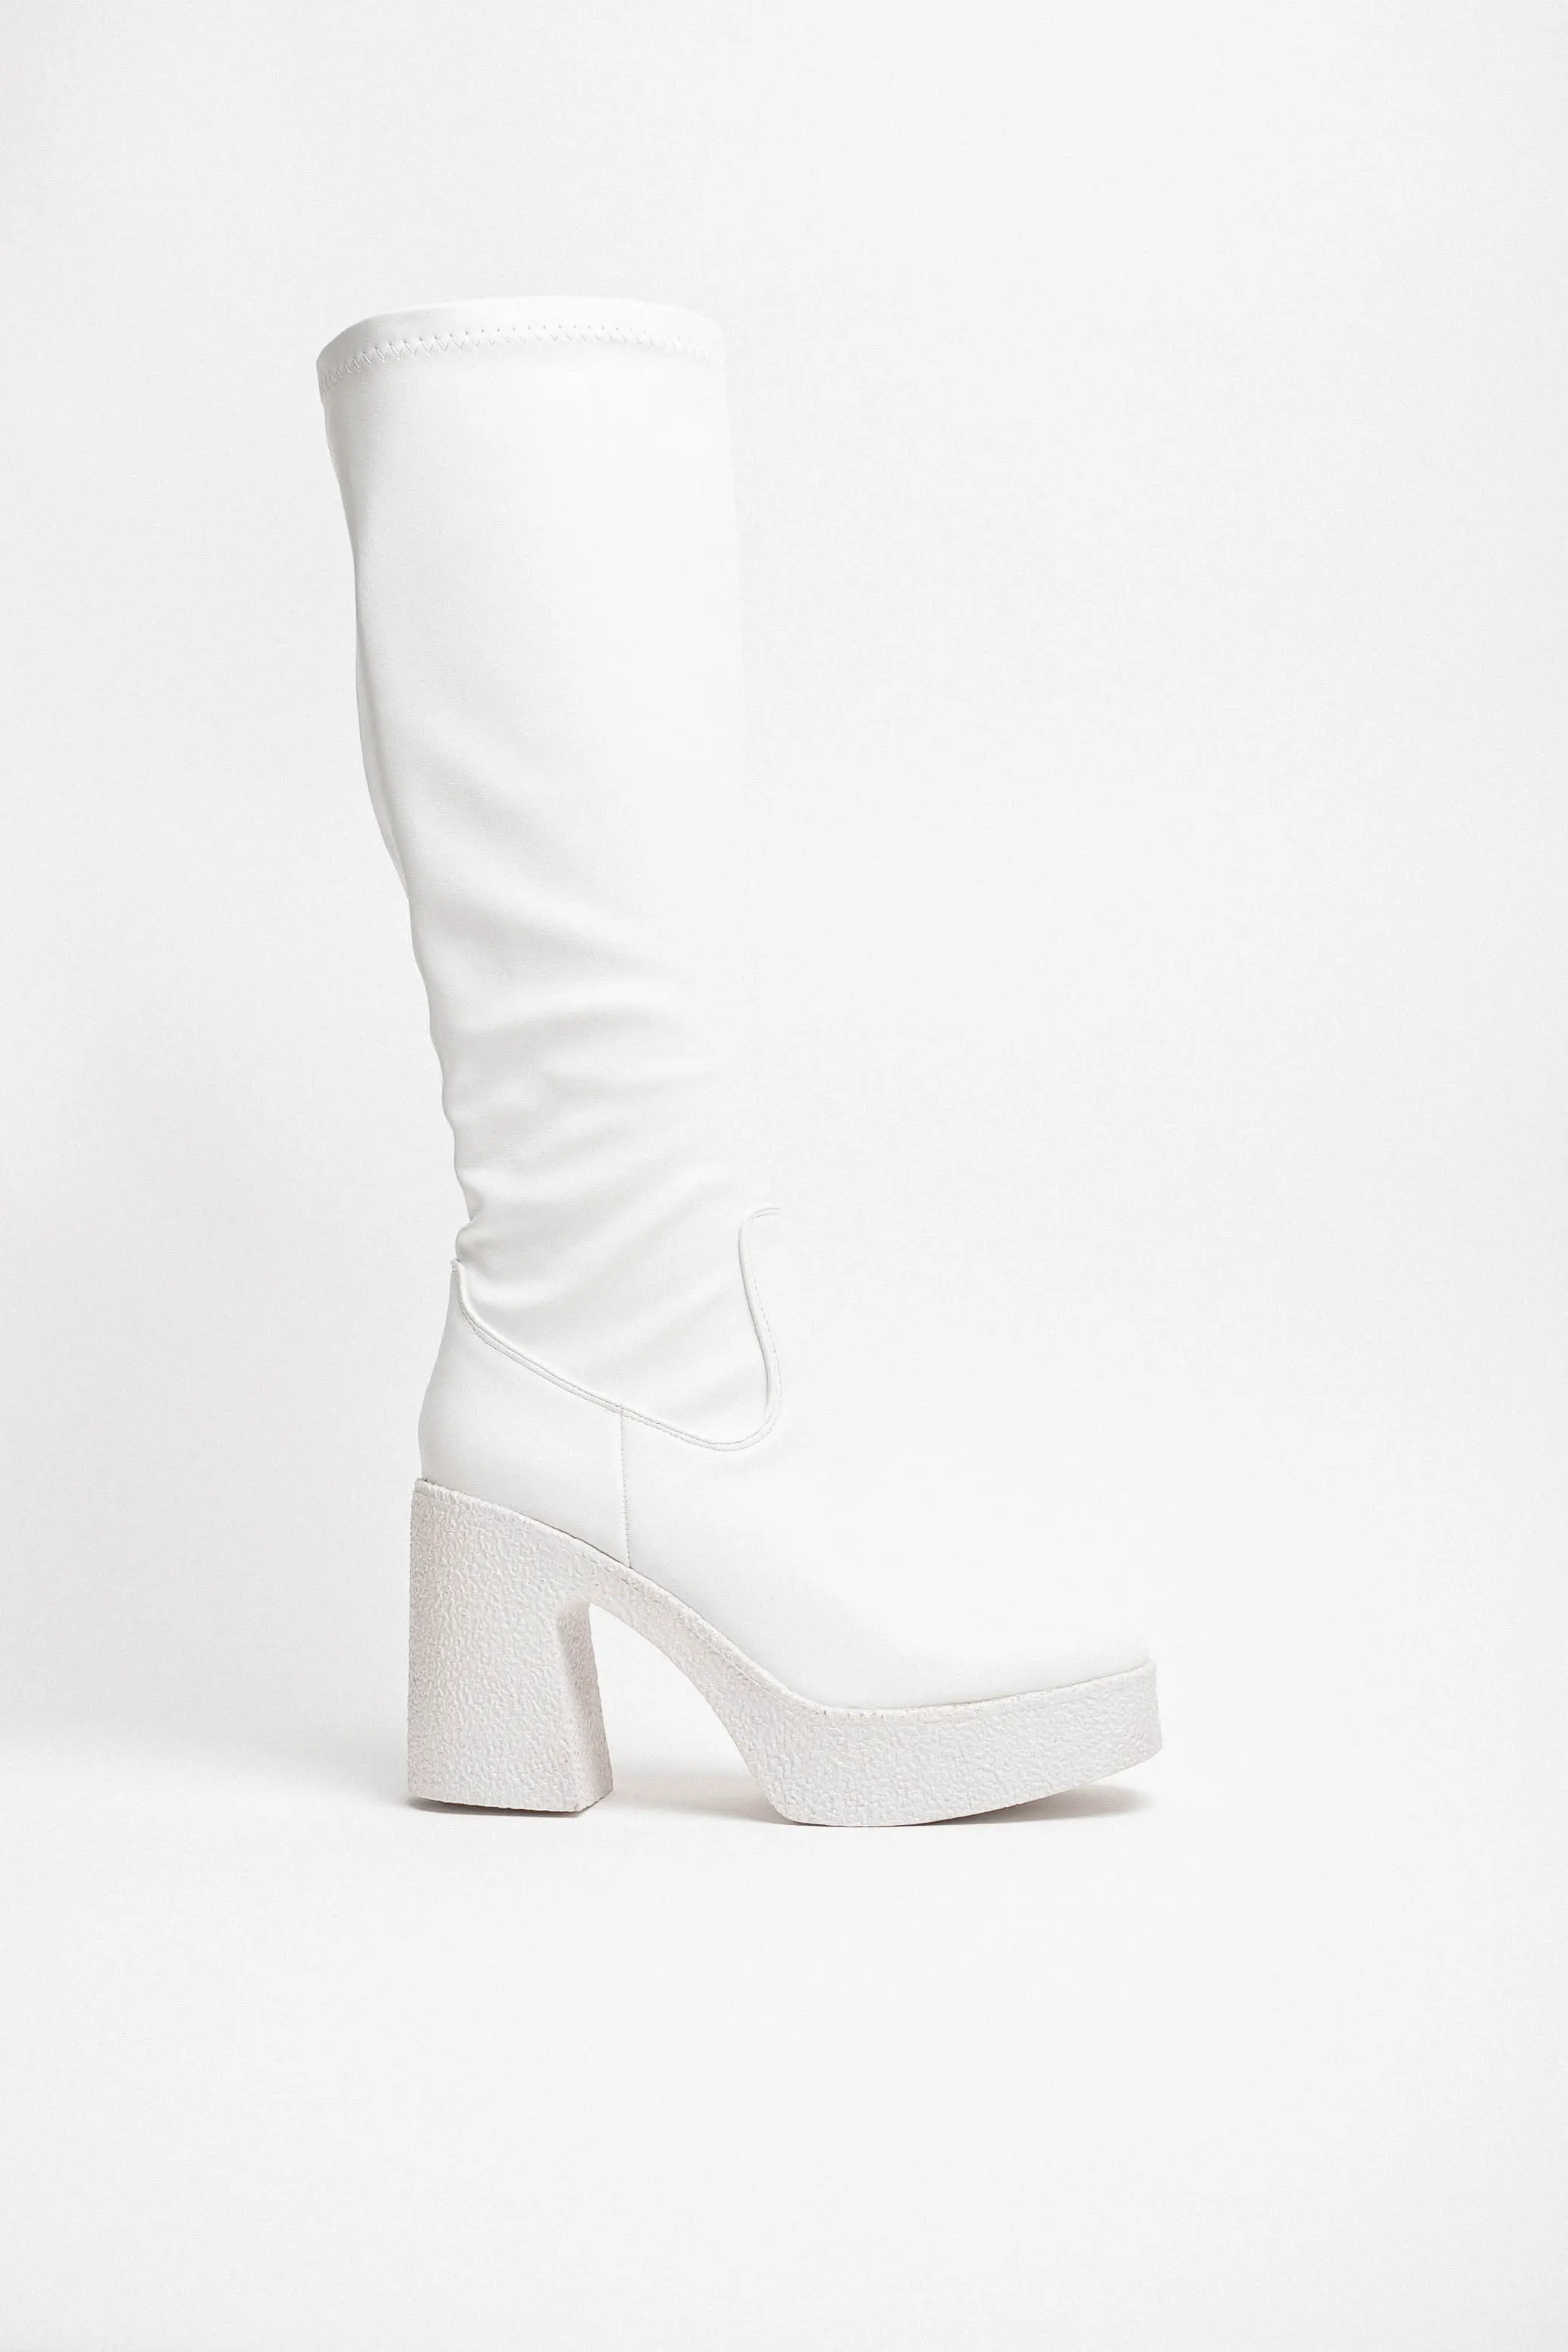 ELY HIGH BOOT - WHITE